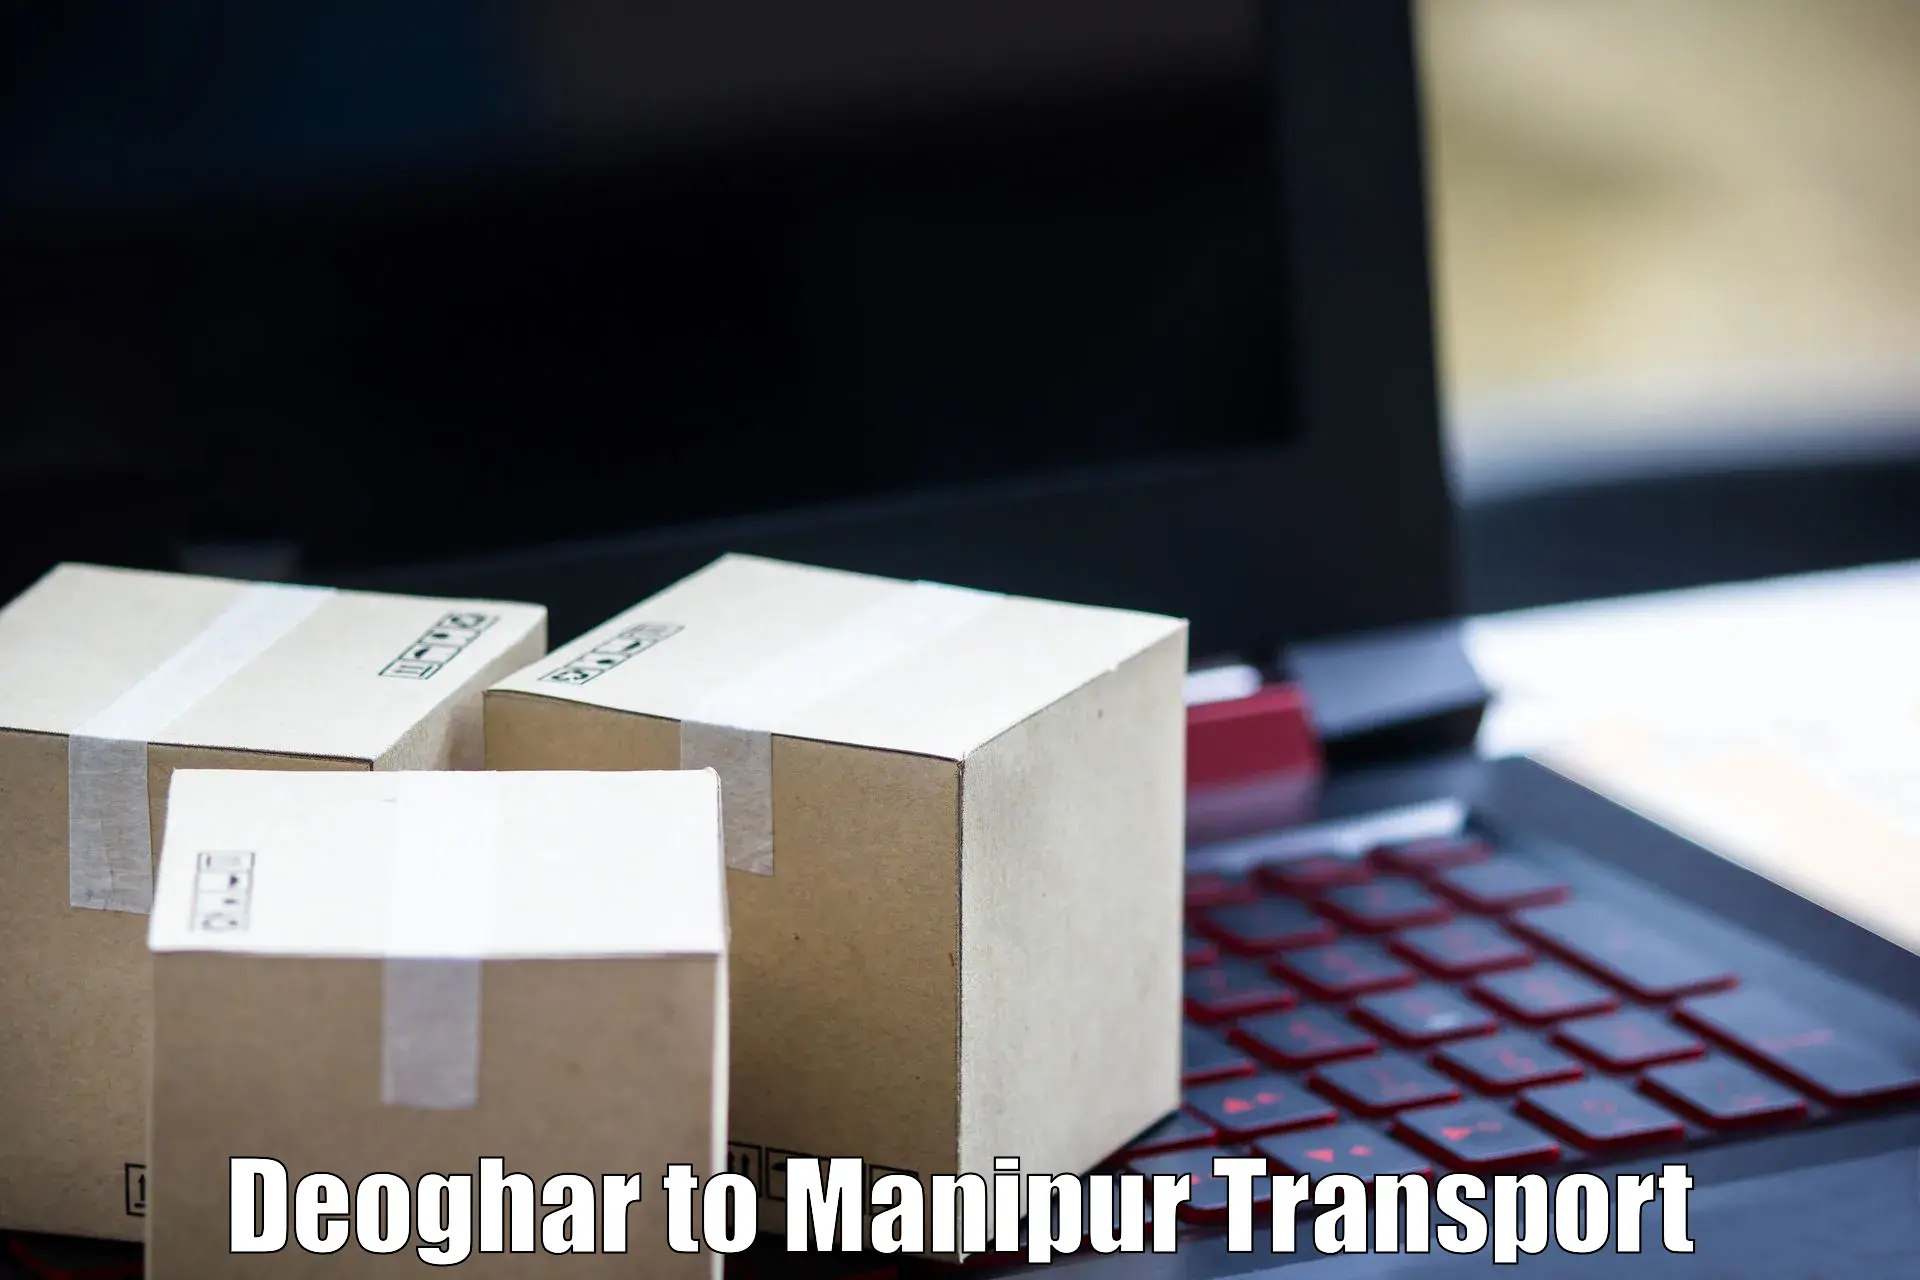 Nearby transport service Deoghar to Imphal